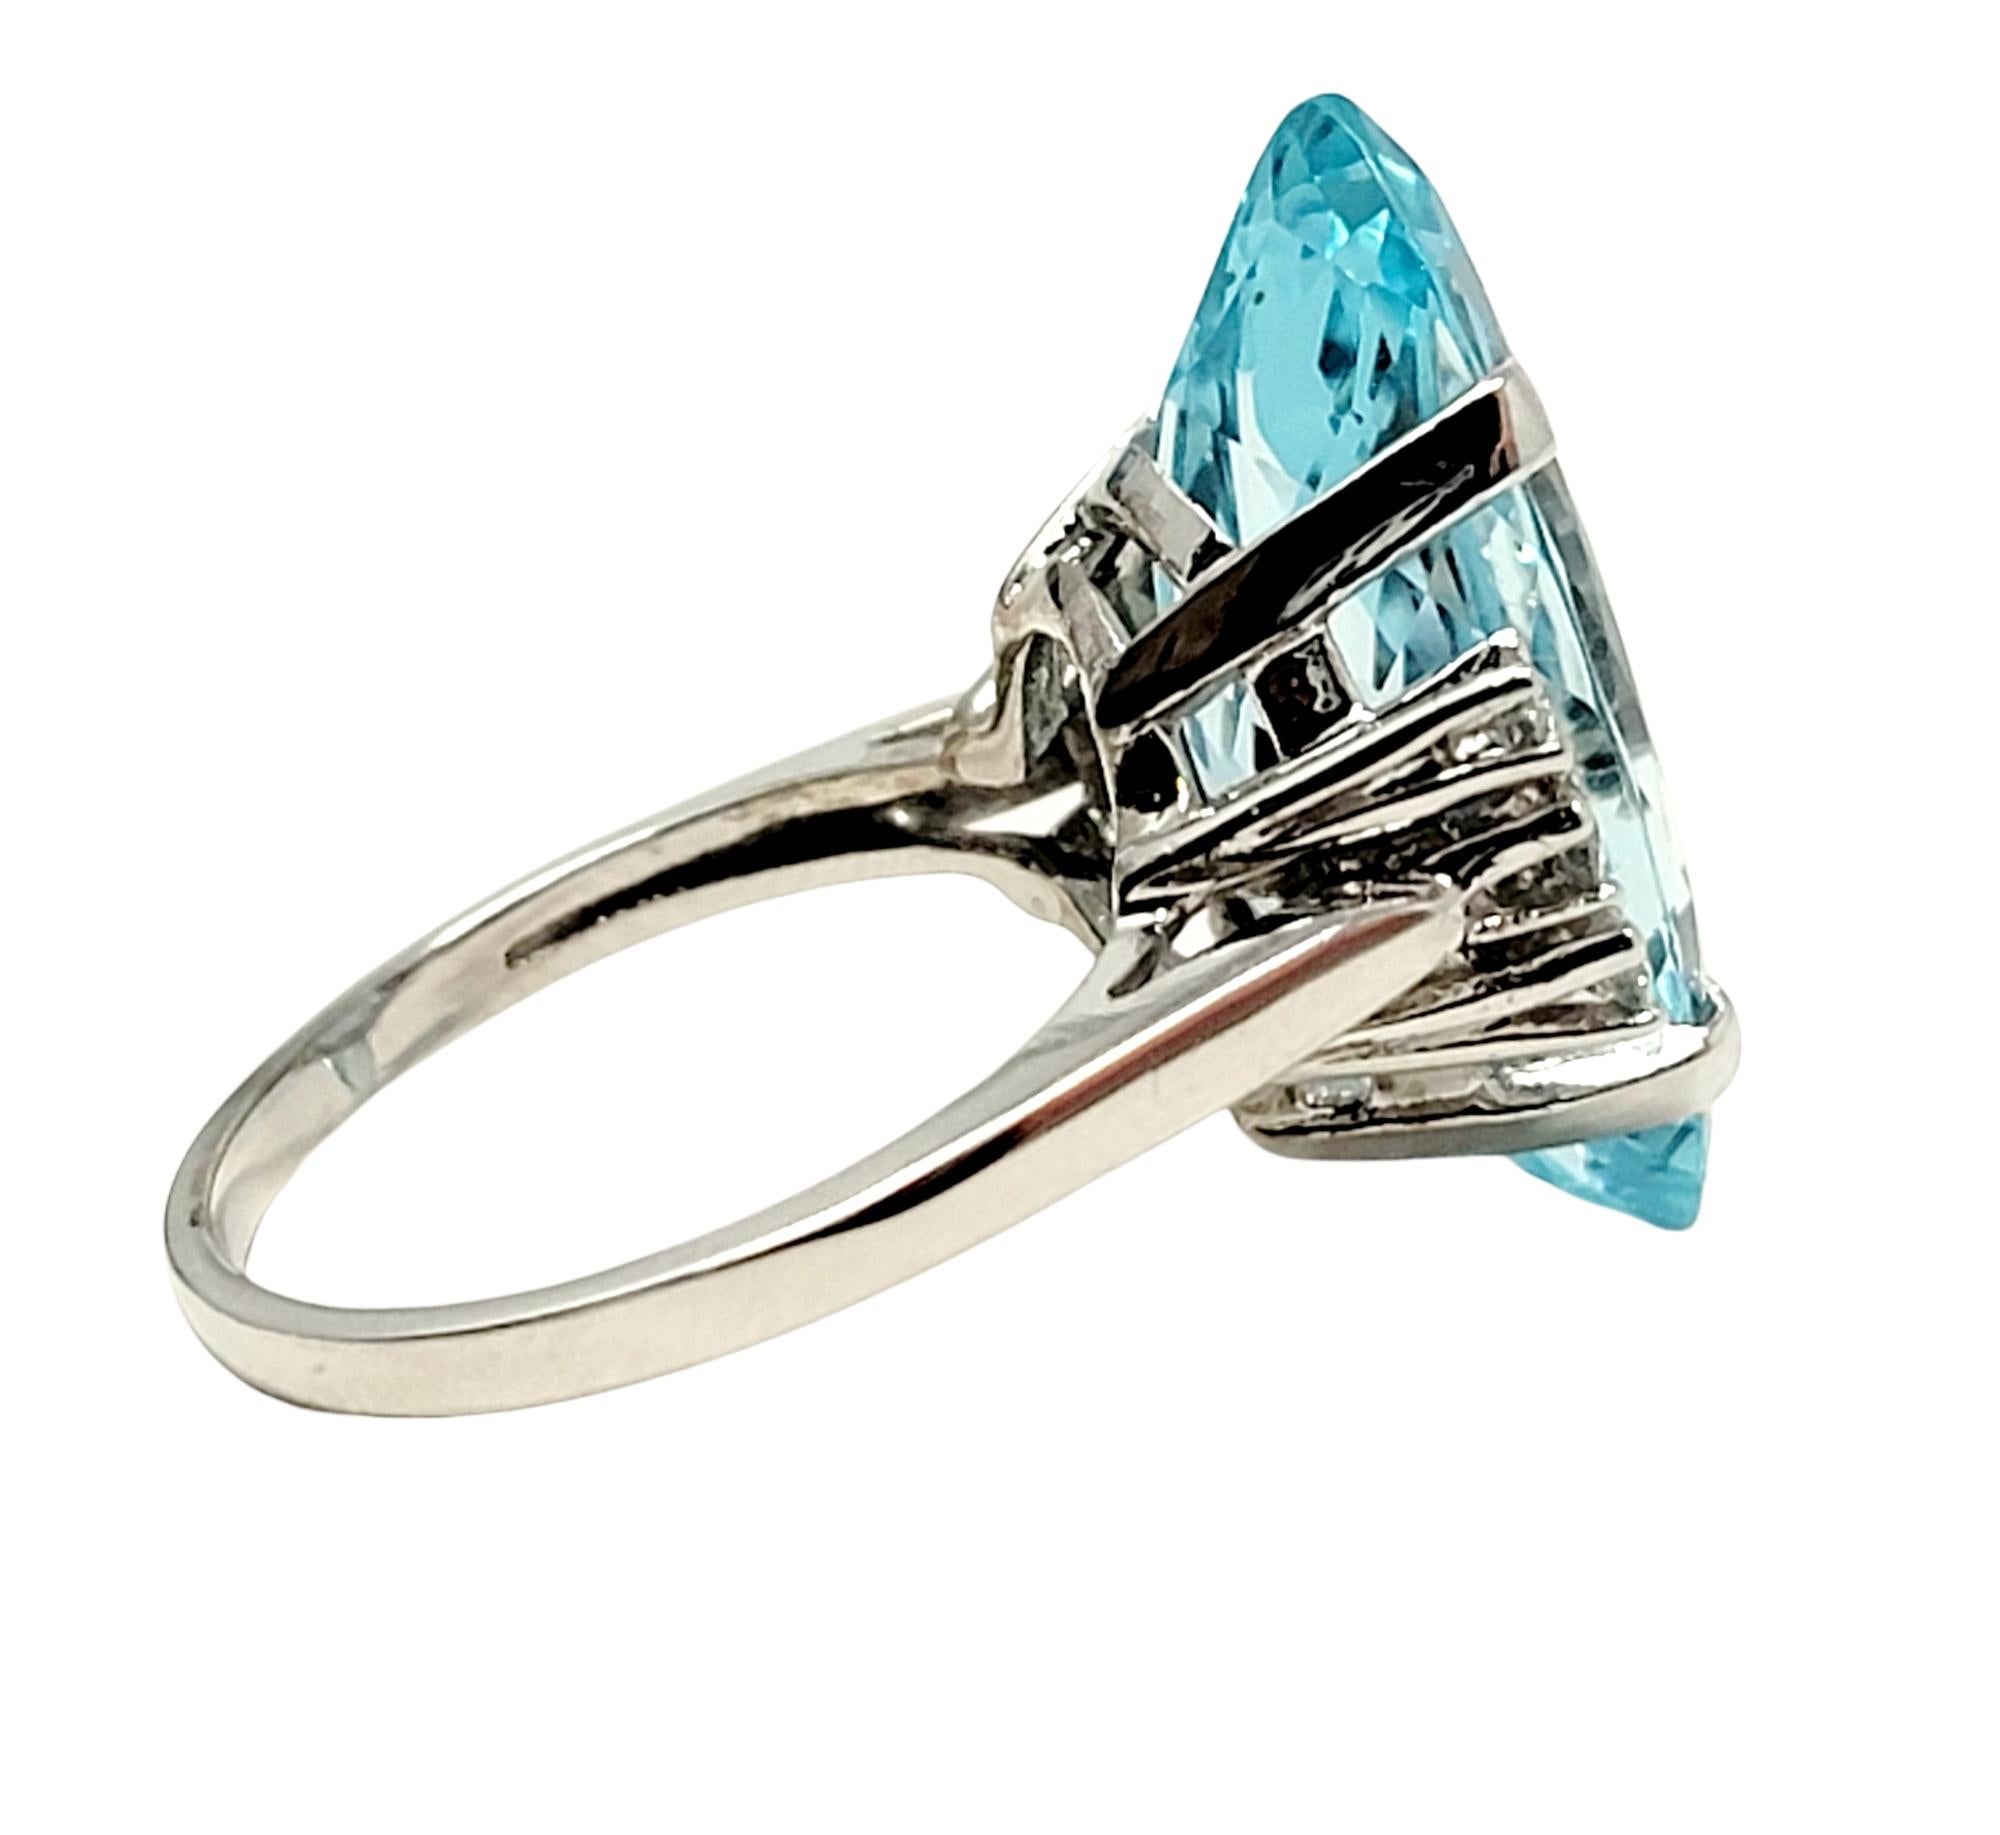 8.61 Carats Total Marquis Cut Aquamarine and Diamond Cocktail Ring 14 Karat Gold For Sale 4